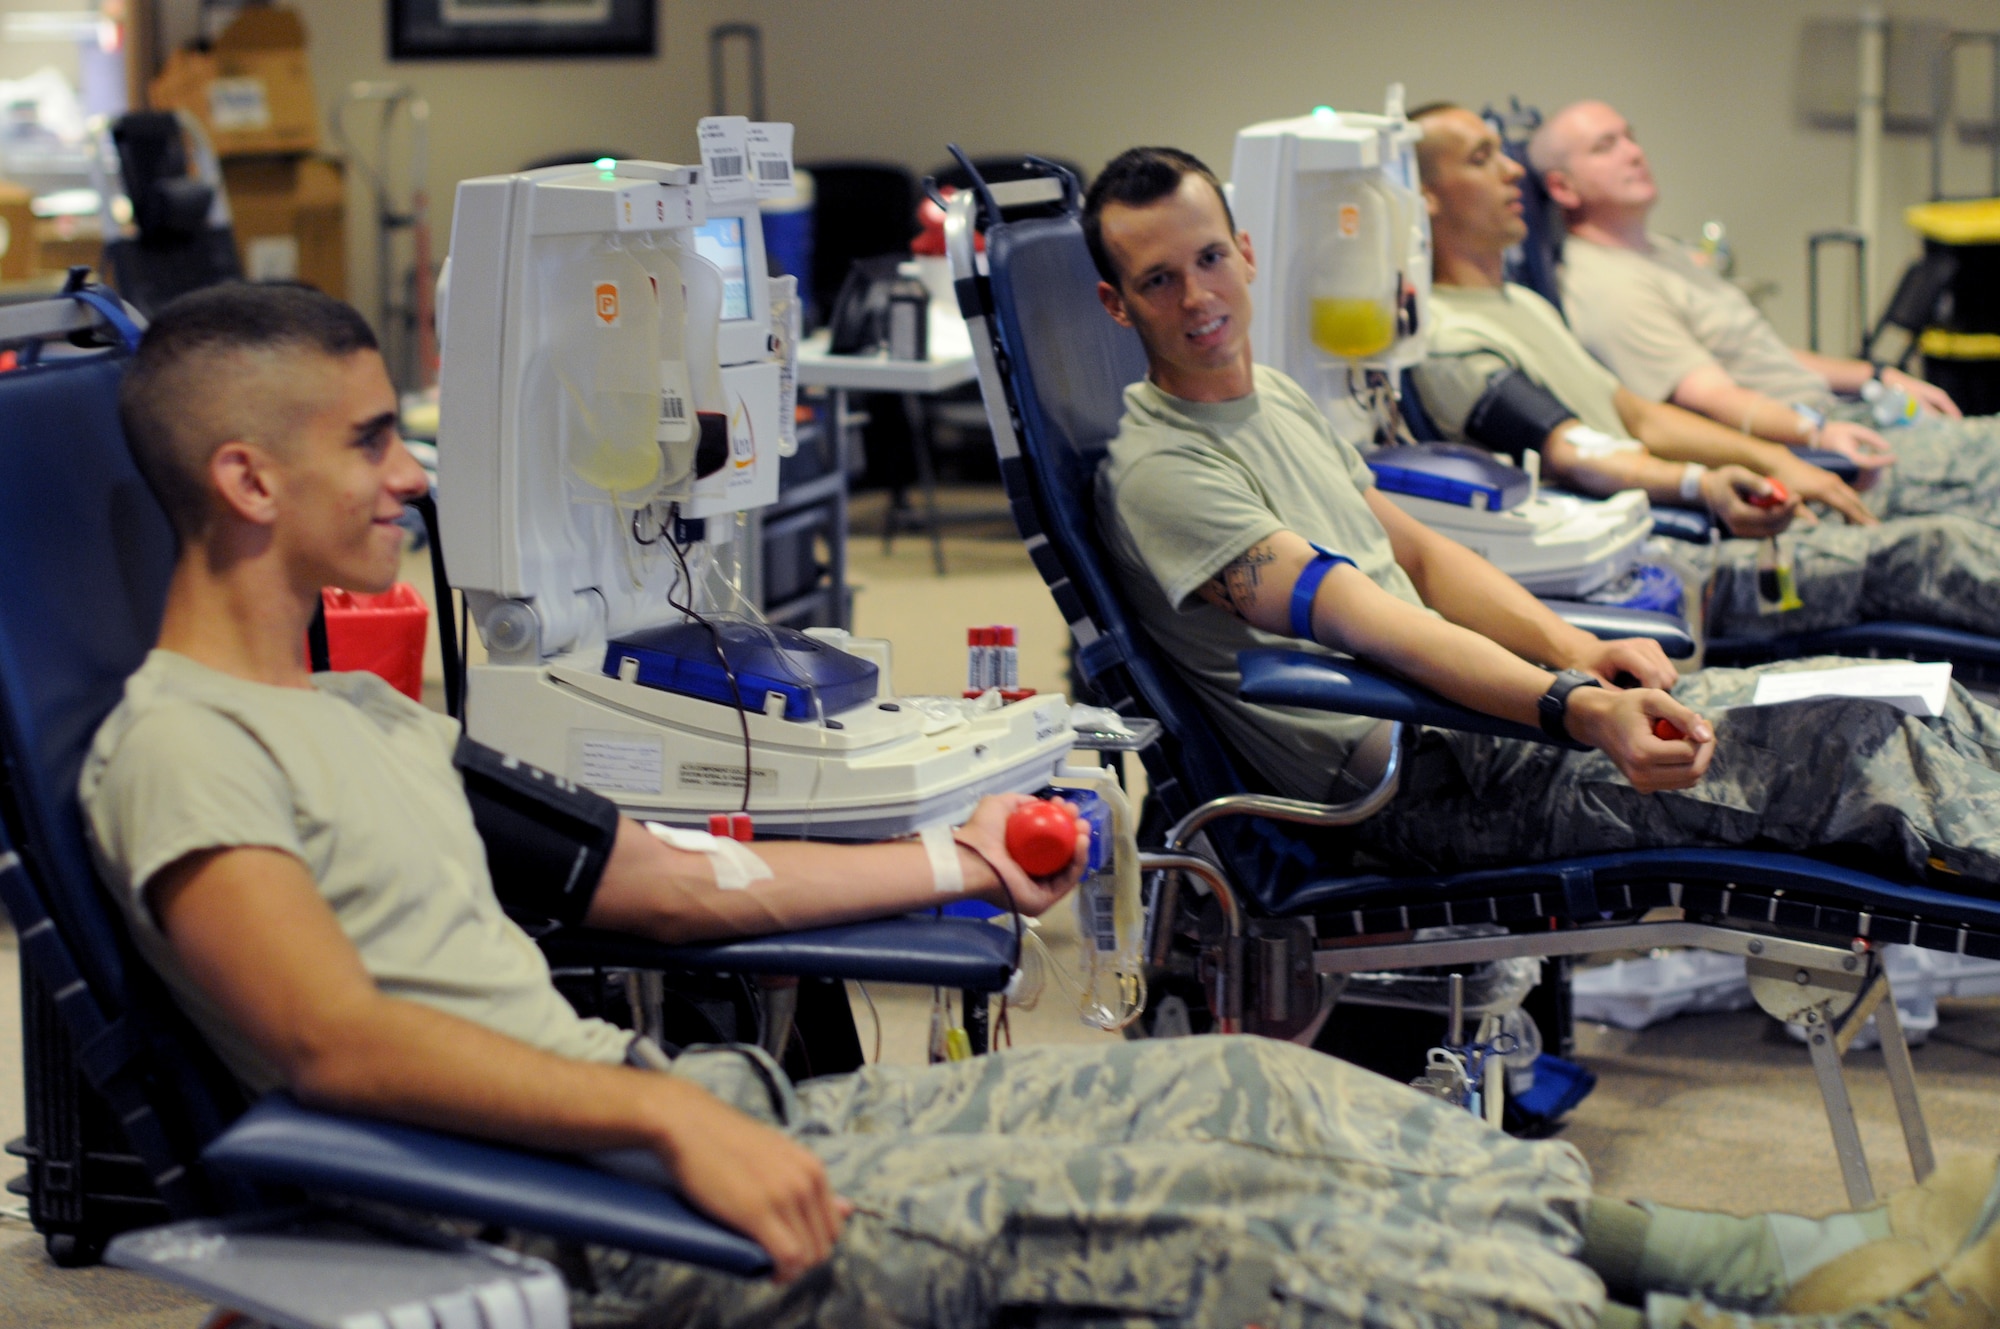 A picture of U.S. Air Force Airman 1st Class Matthew Baruffi, Airman 1st Class Brandon Staines, Senior Airman Ian VanVranken and Tech. Sgt. Gary Apel, all members of the New Jersey Air National Guard's 177th Fighter Wing, relaxing as they give blood during a blood drive.